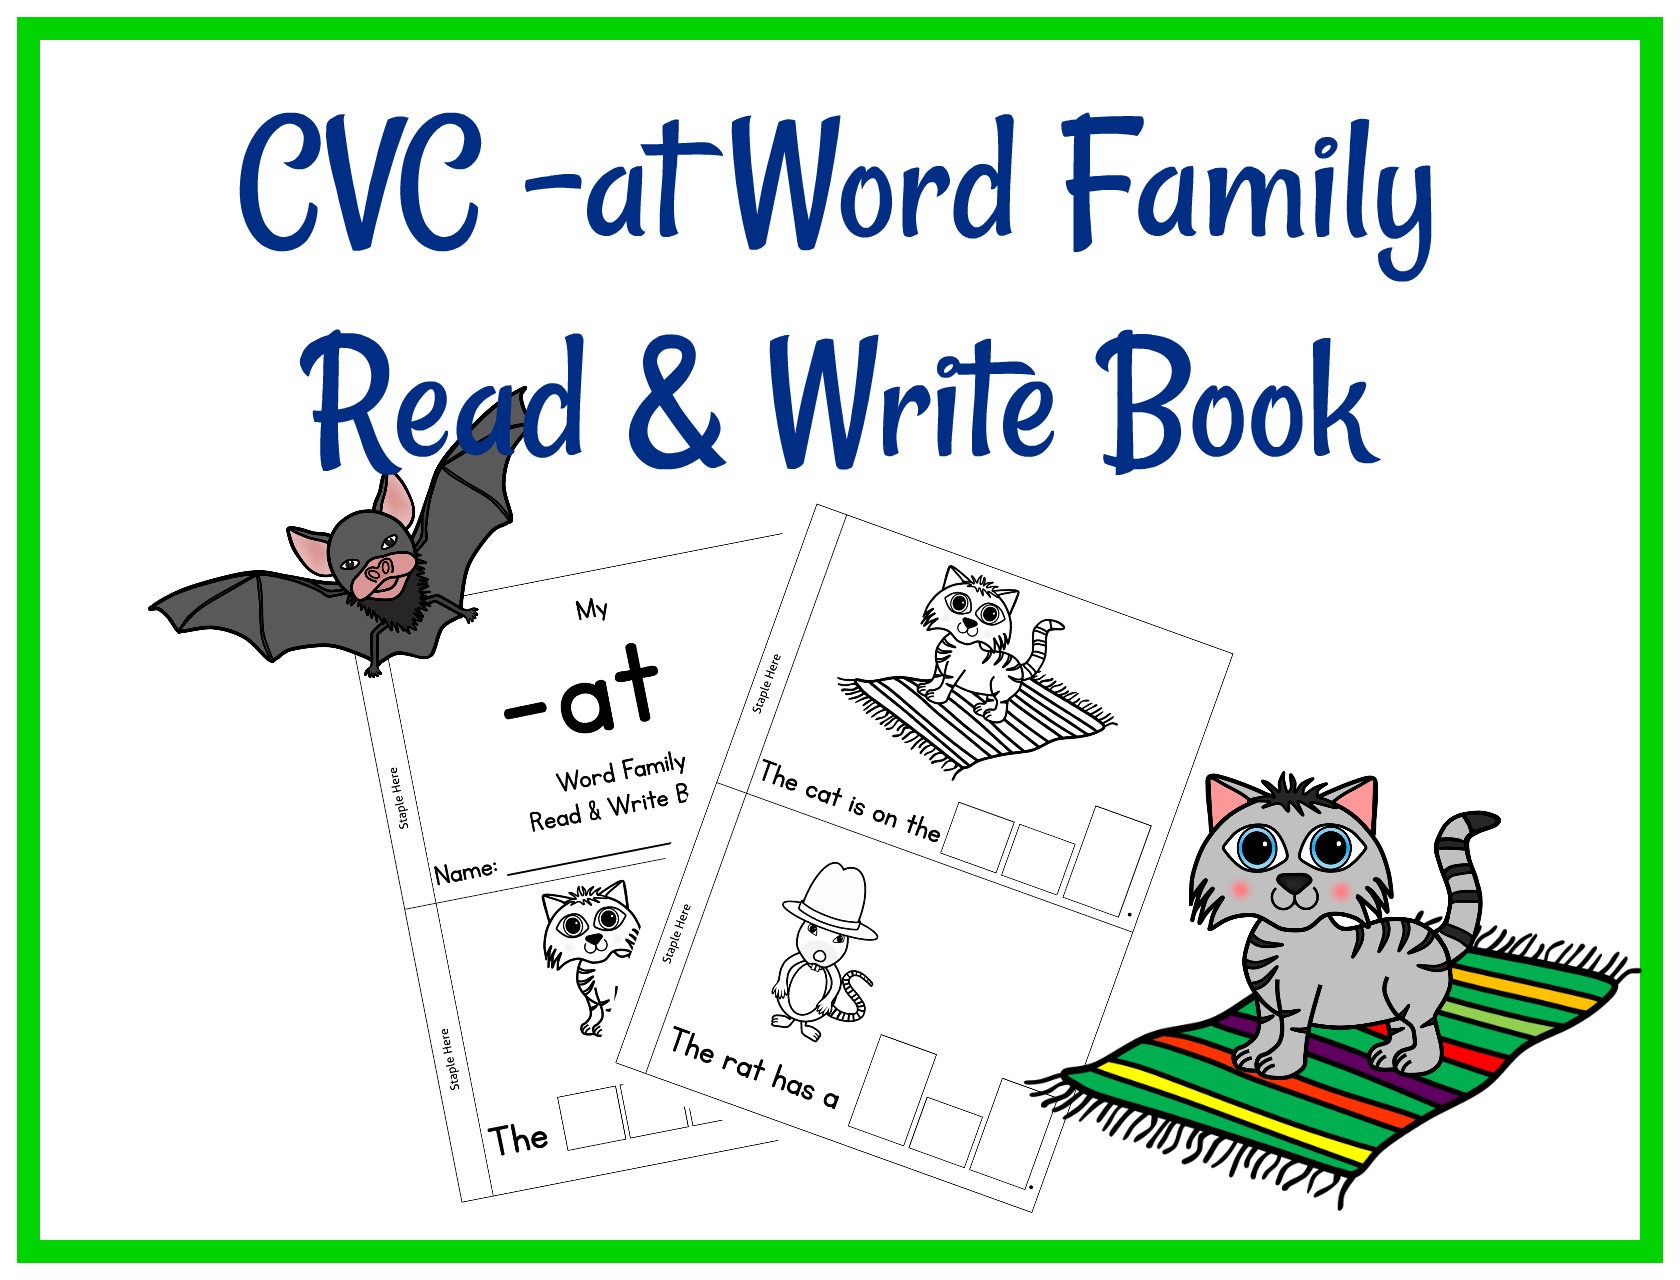 cvc-at-word-family-read-write-book